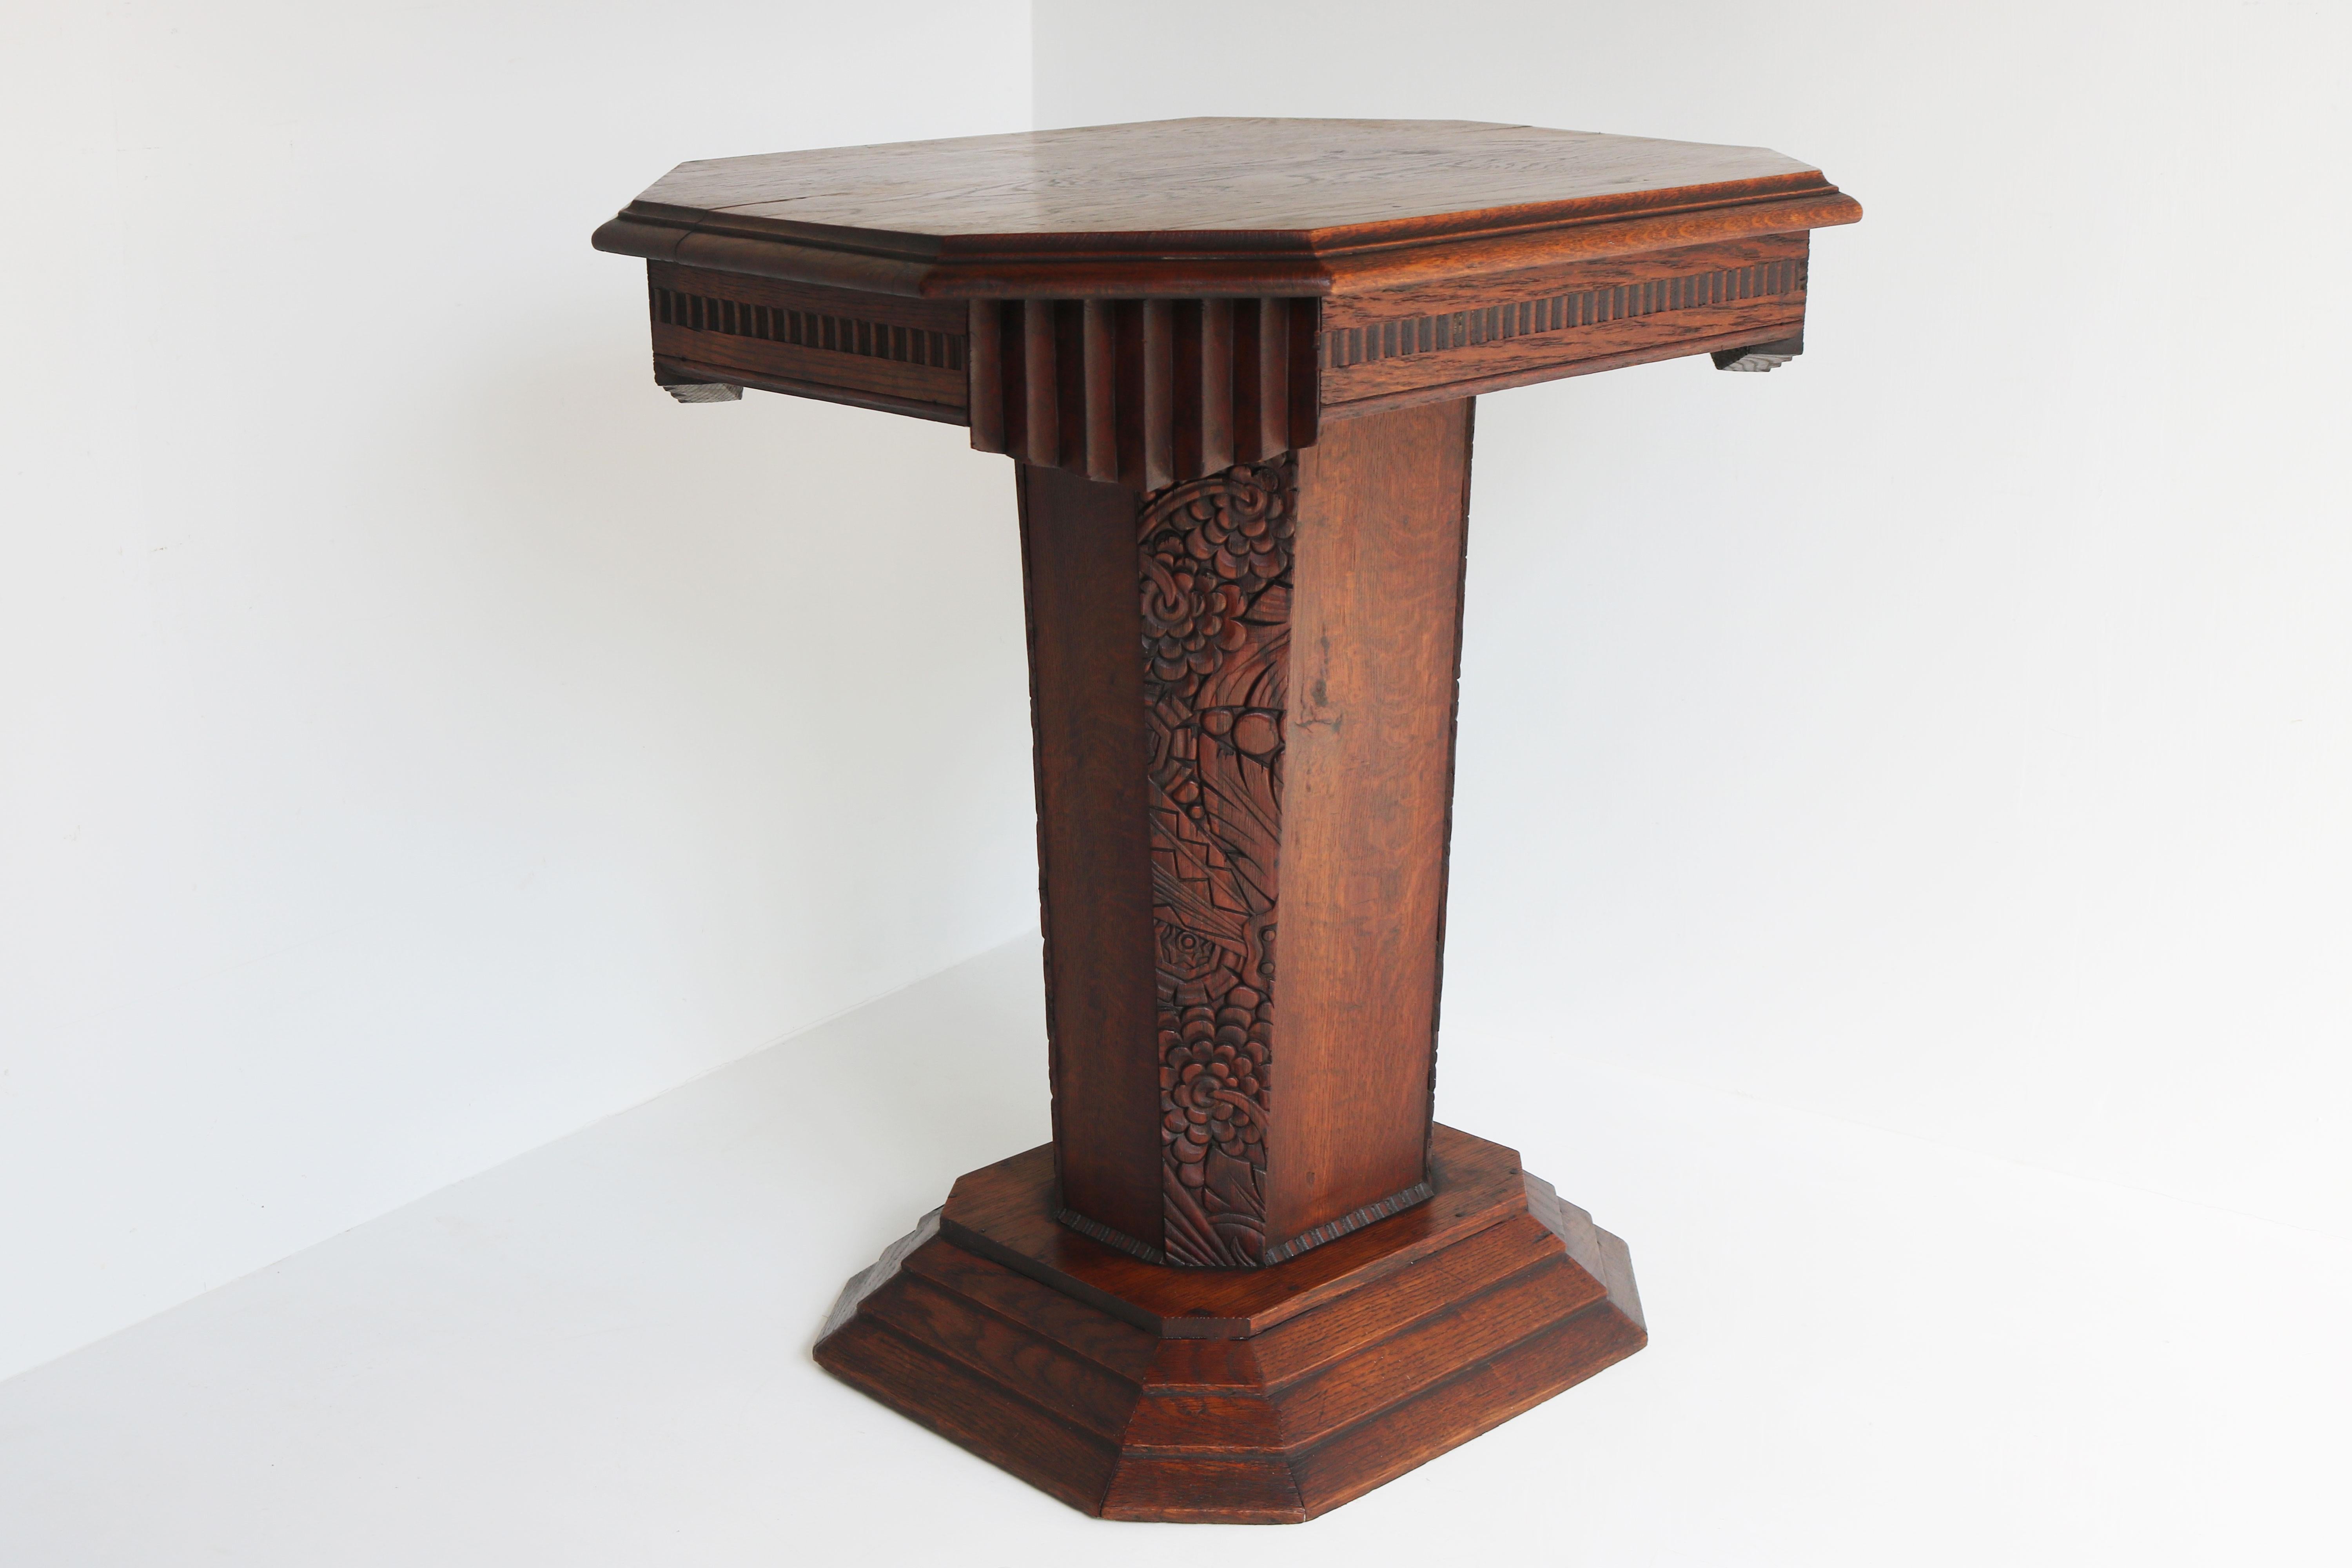 Gorgeous high quality Art Deco side table made out of solid oak 1920 France. 
Octagon shaped with 4 hand carved panels decorated with Art Deco geometric shapes. 
Really nice details and craftsmanship. Its quality & unique shape make it an amazing